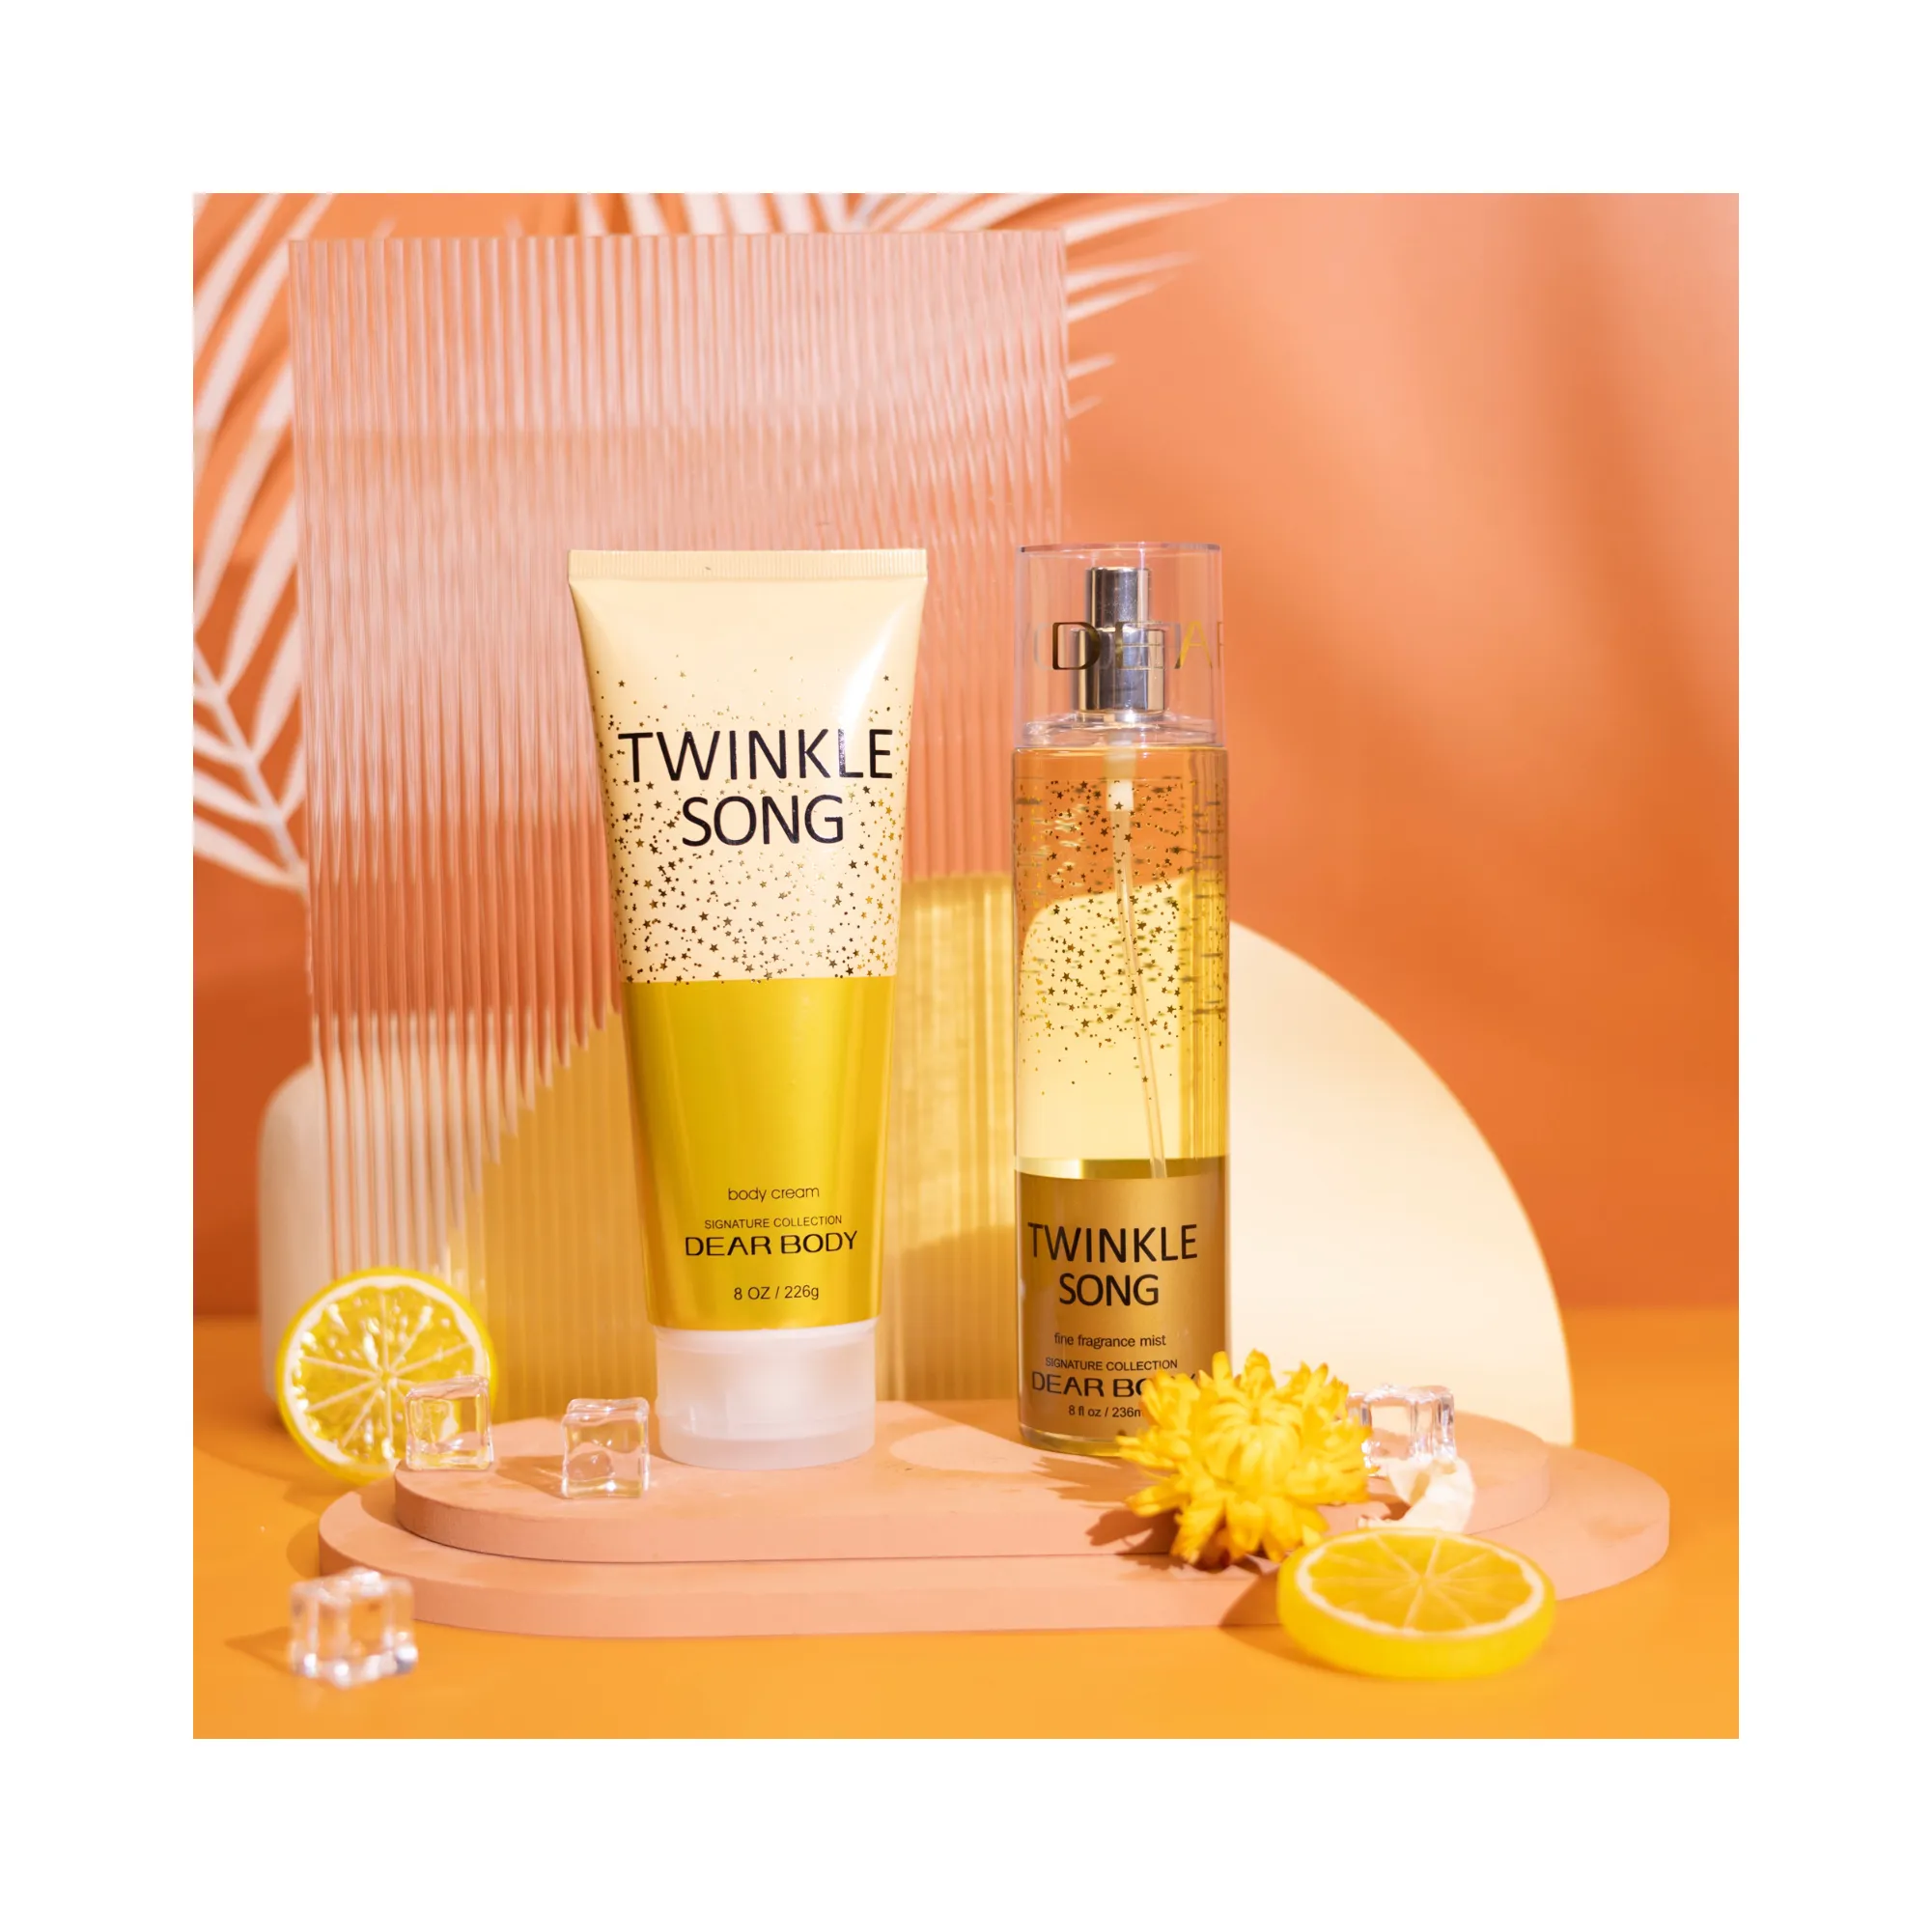 Secret Twinkle song mixed fragrance gift set fresh fruit mix with strong floral scent perfume and body care with low price